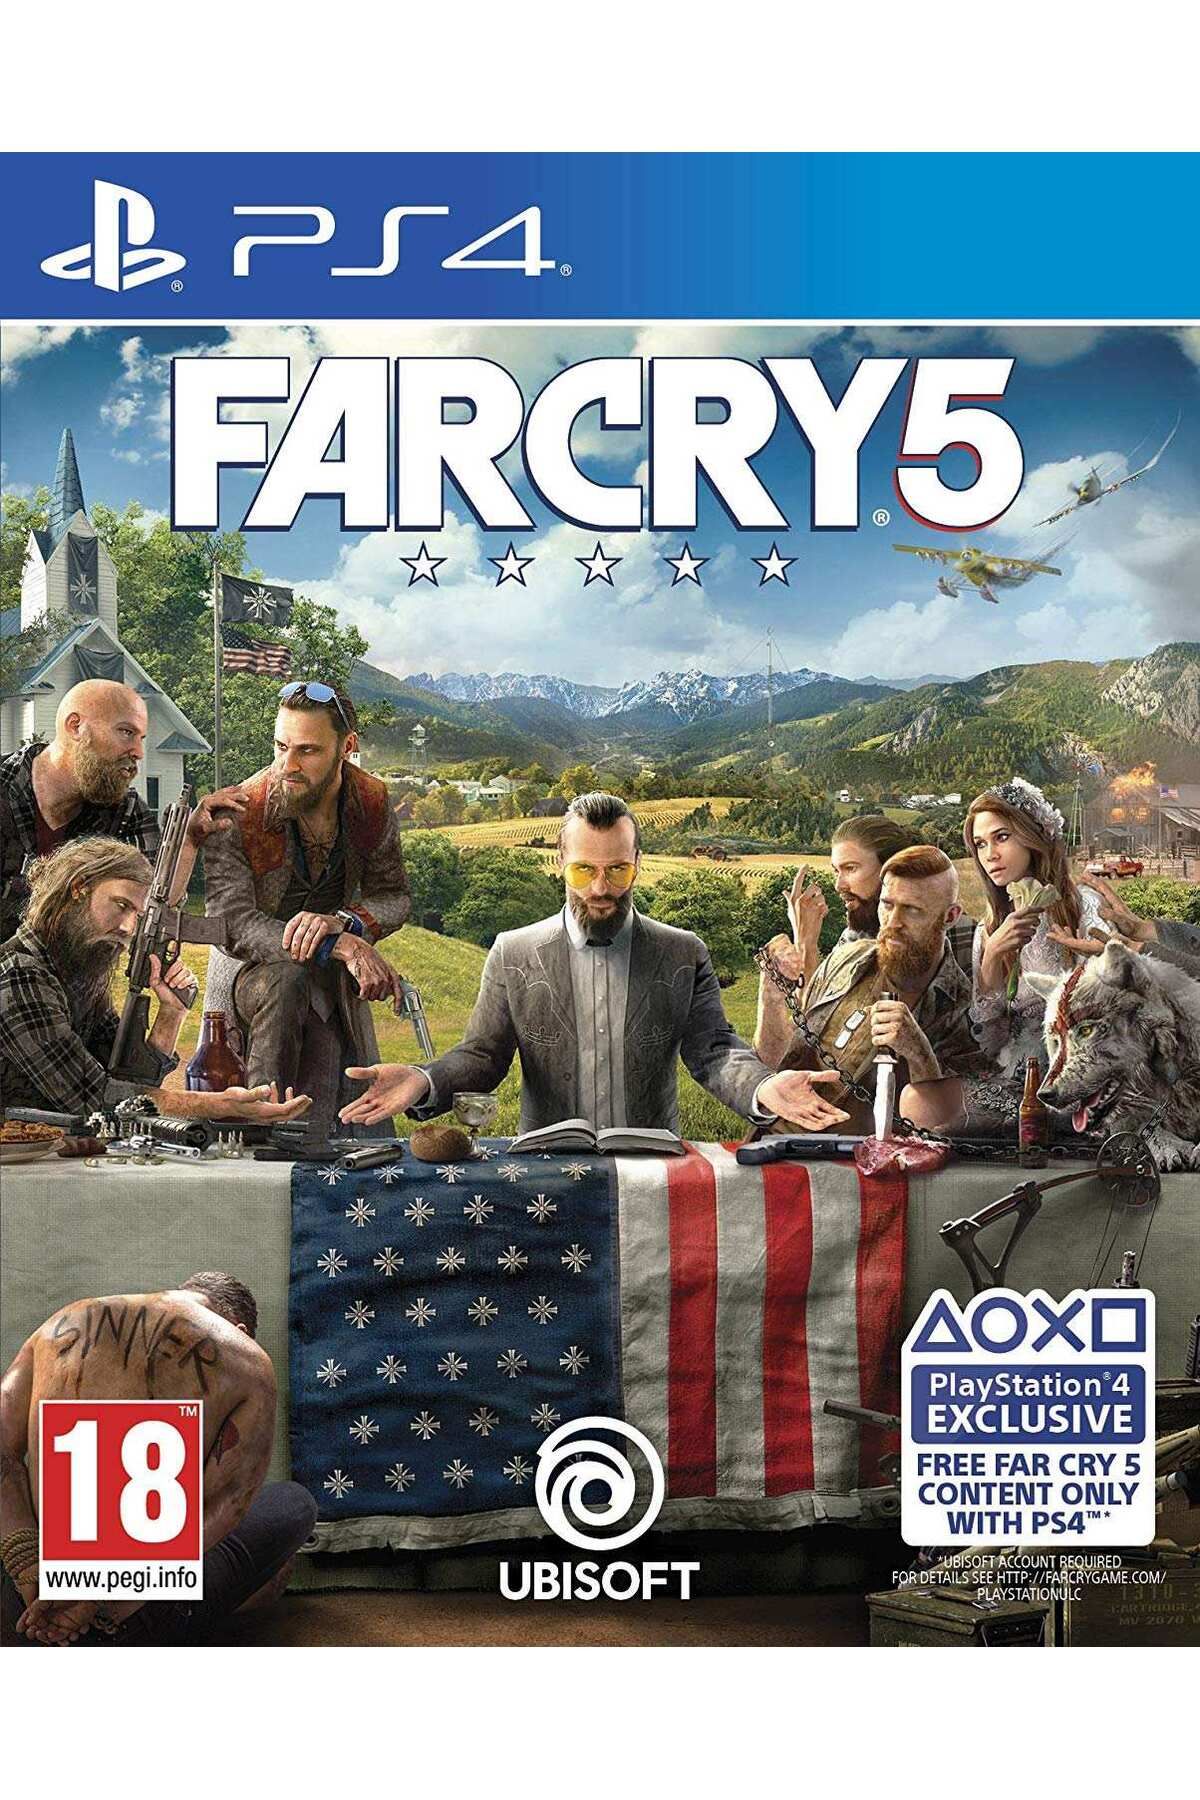 Ubisoft Ps4 Far Cry 5